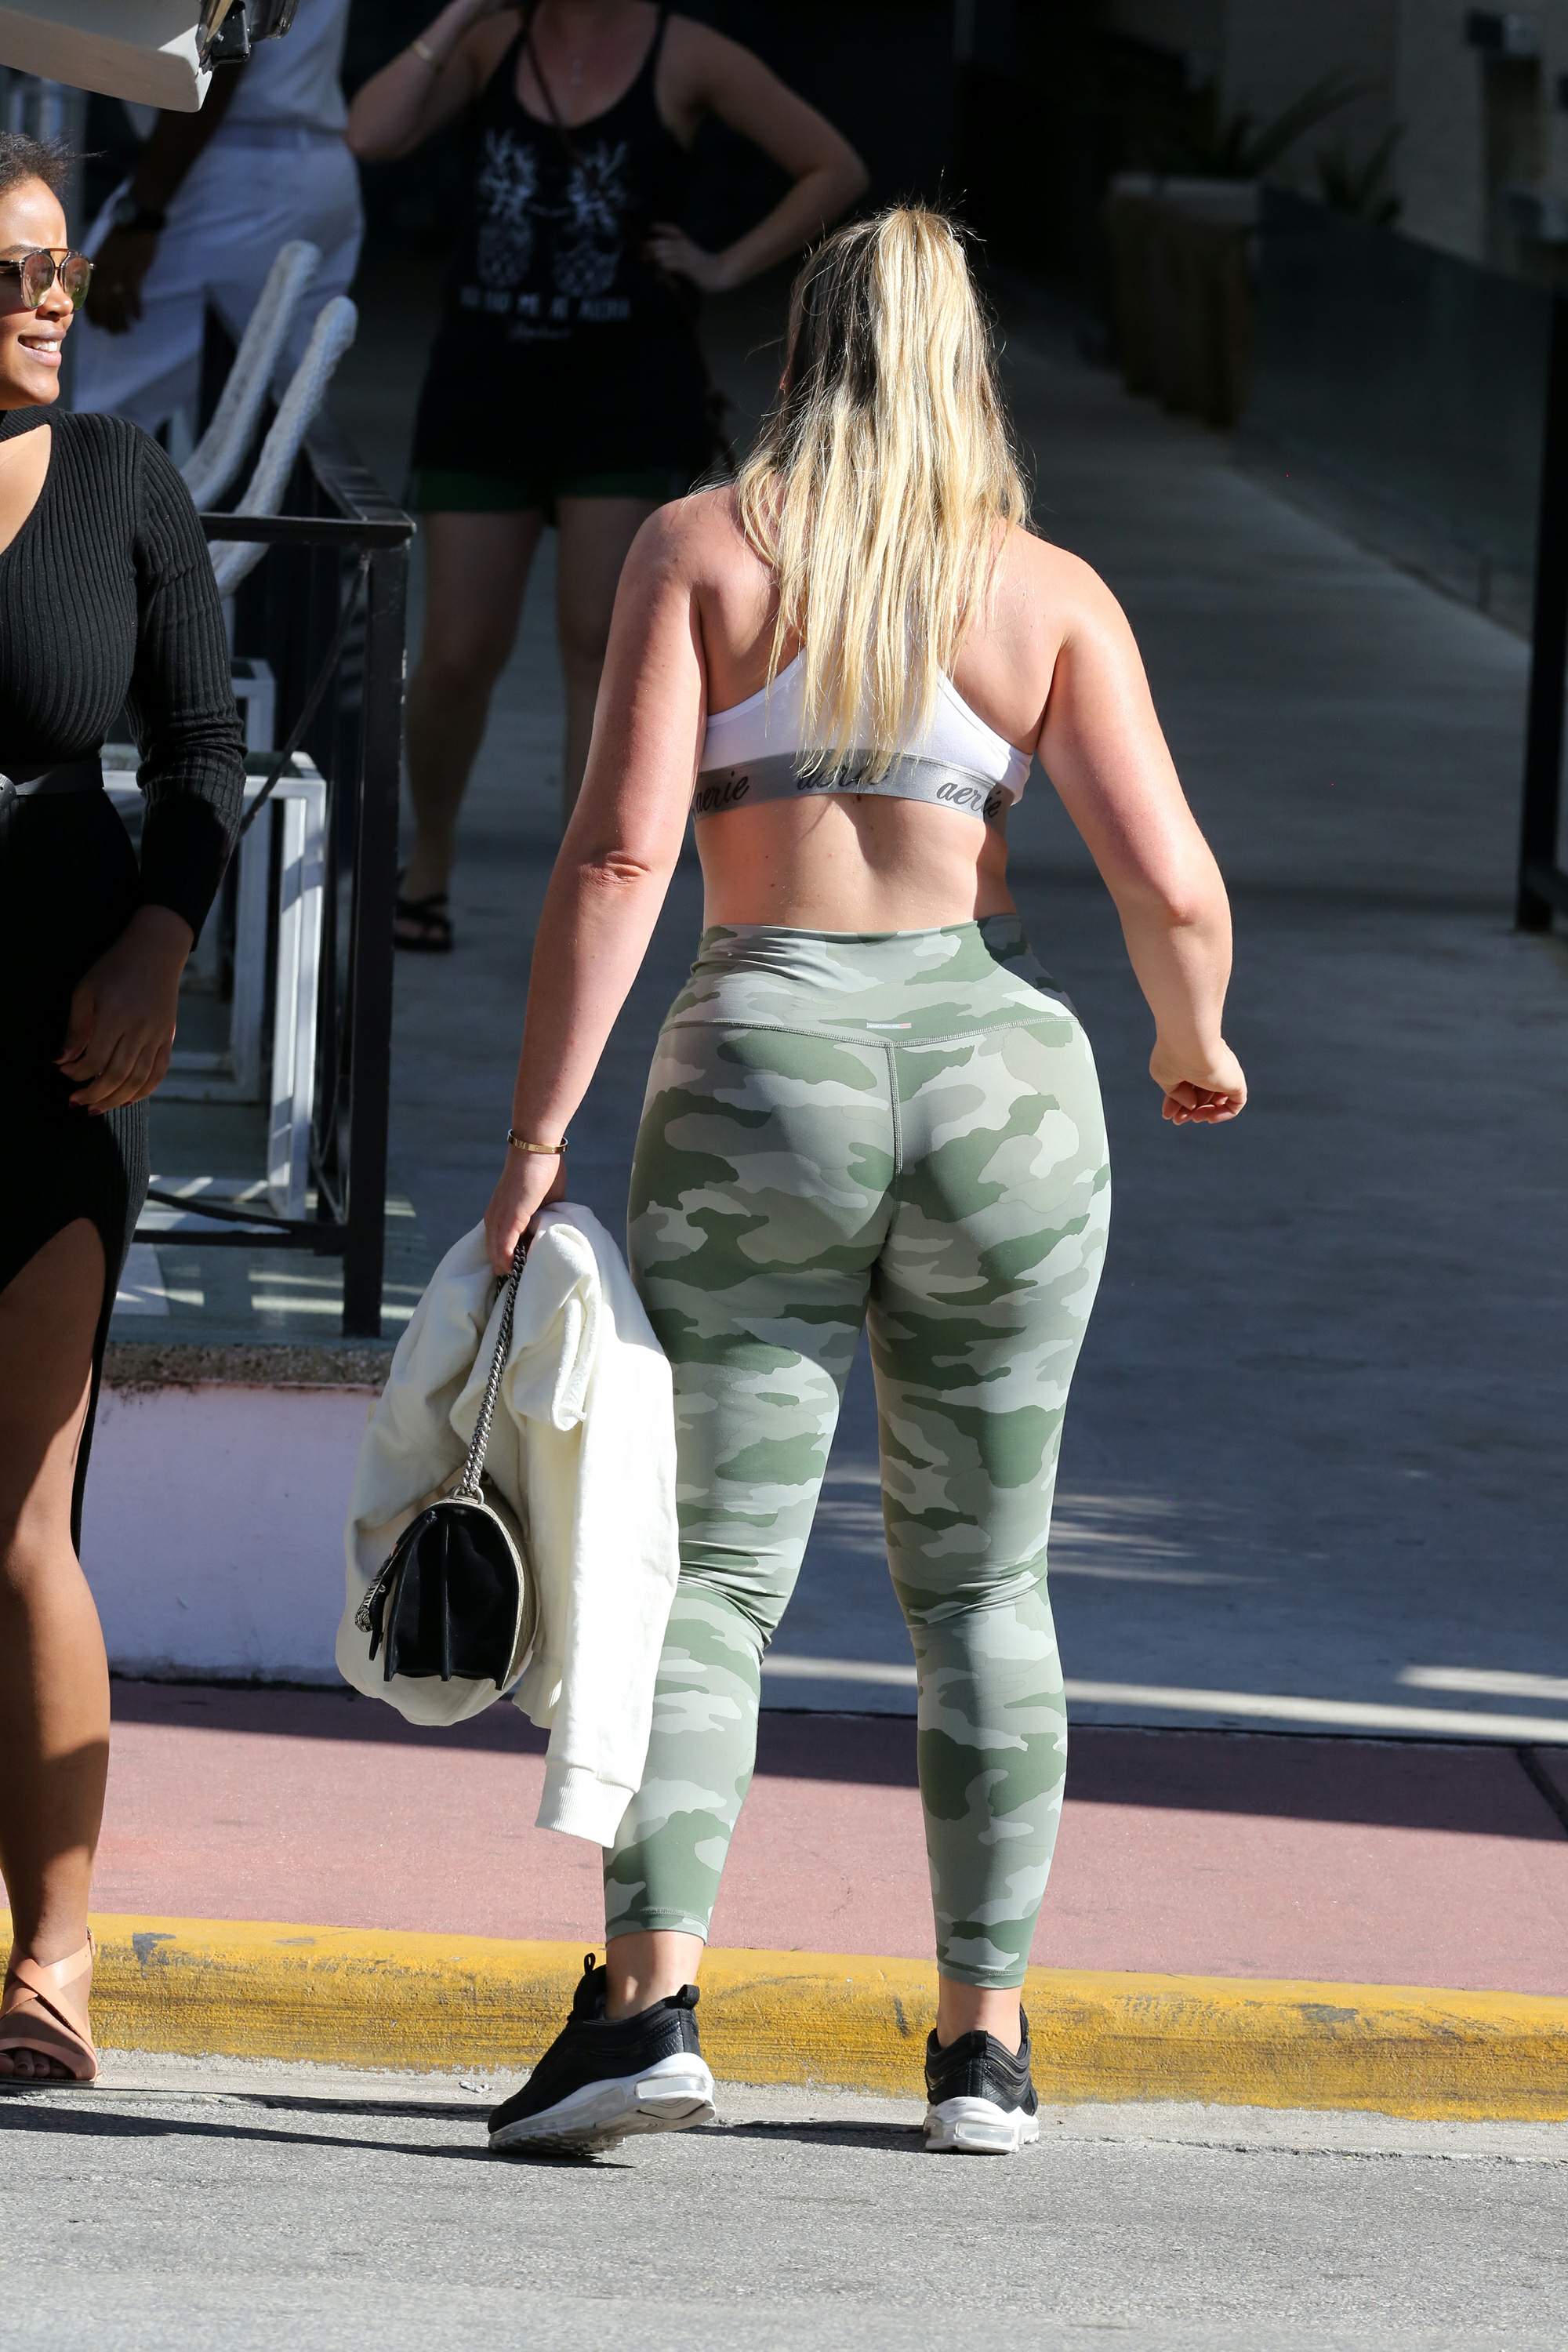 ass tight in leggings : iskralawrence